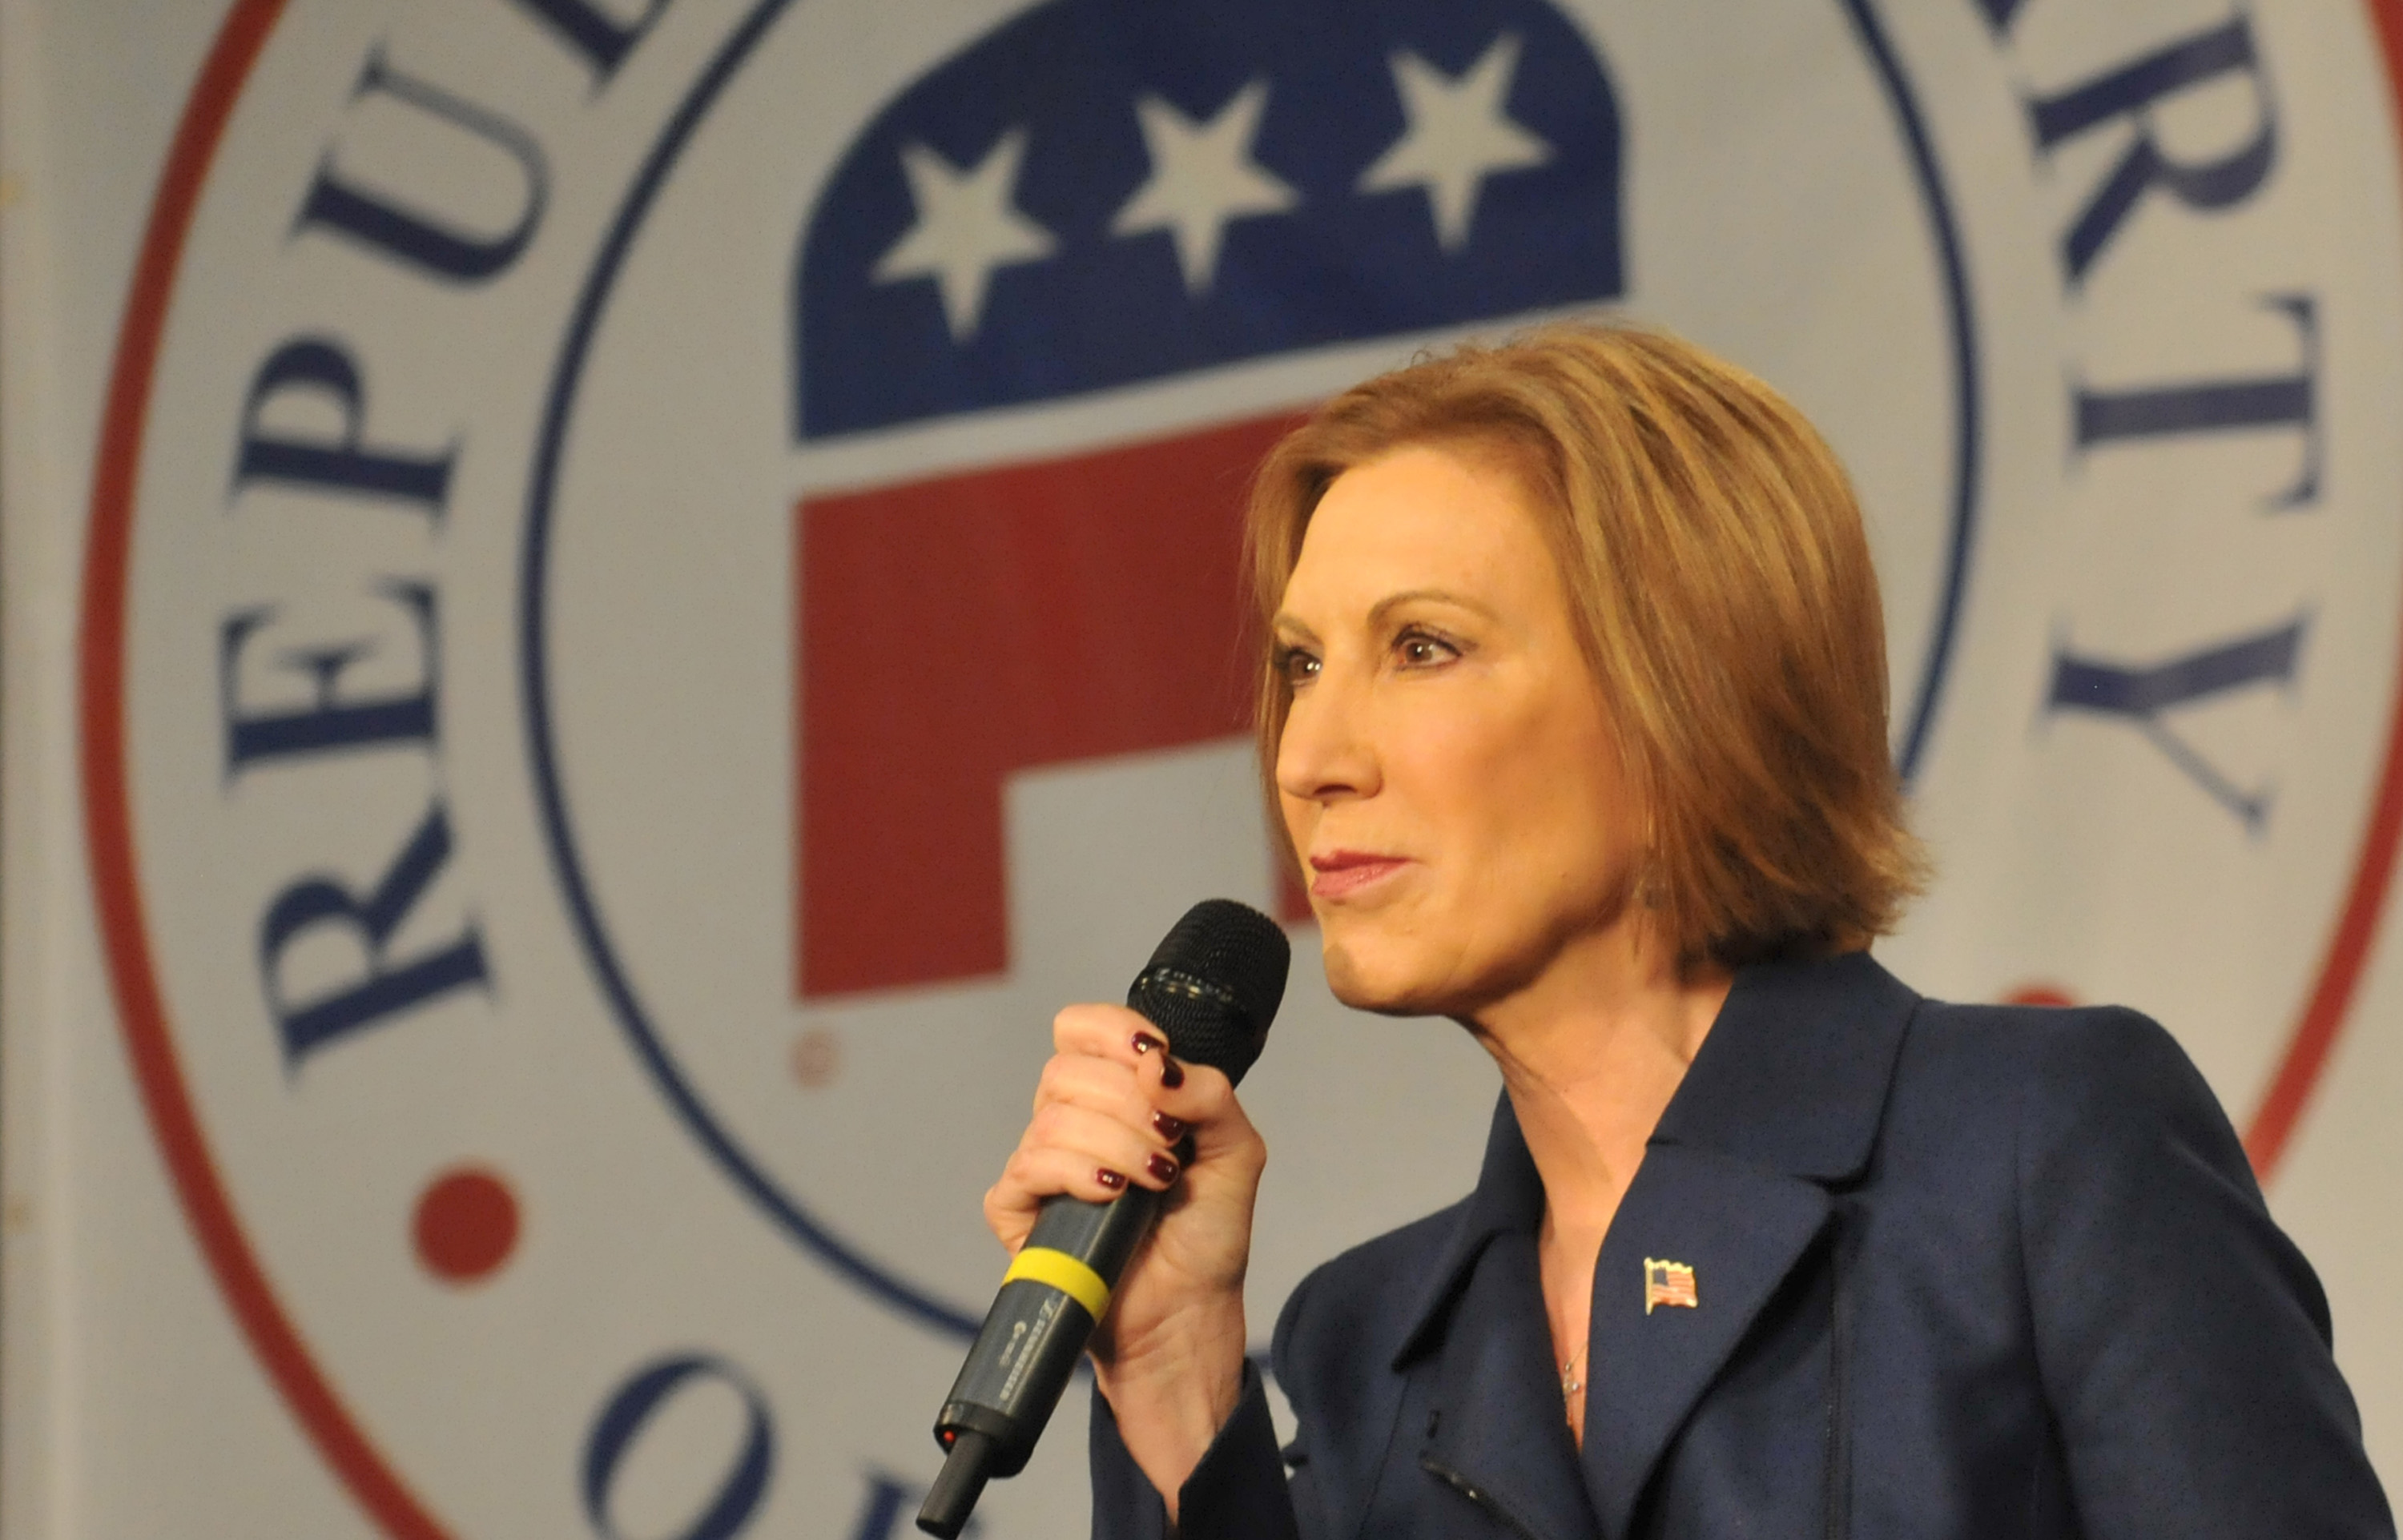 Republican presidential candidate Carly Fiorina speaks at the Growth and Opportunity Party, at the Iowa State Fair in Des Moines, Iowa, on Oct. 31, 2015.